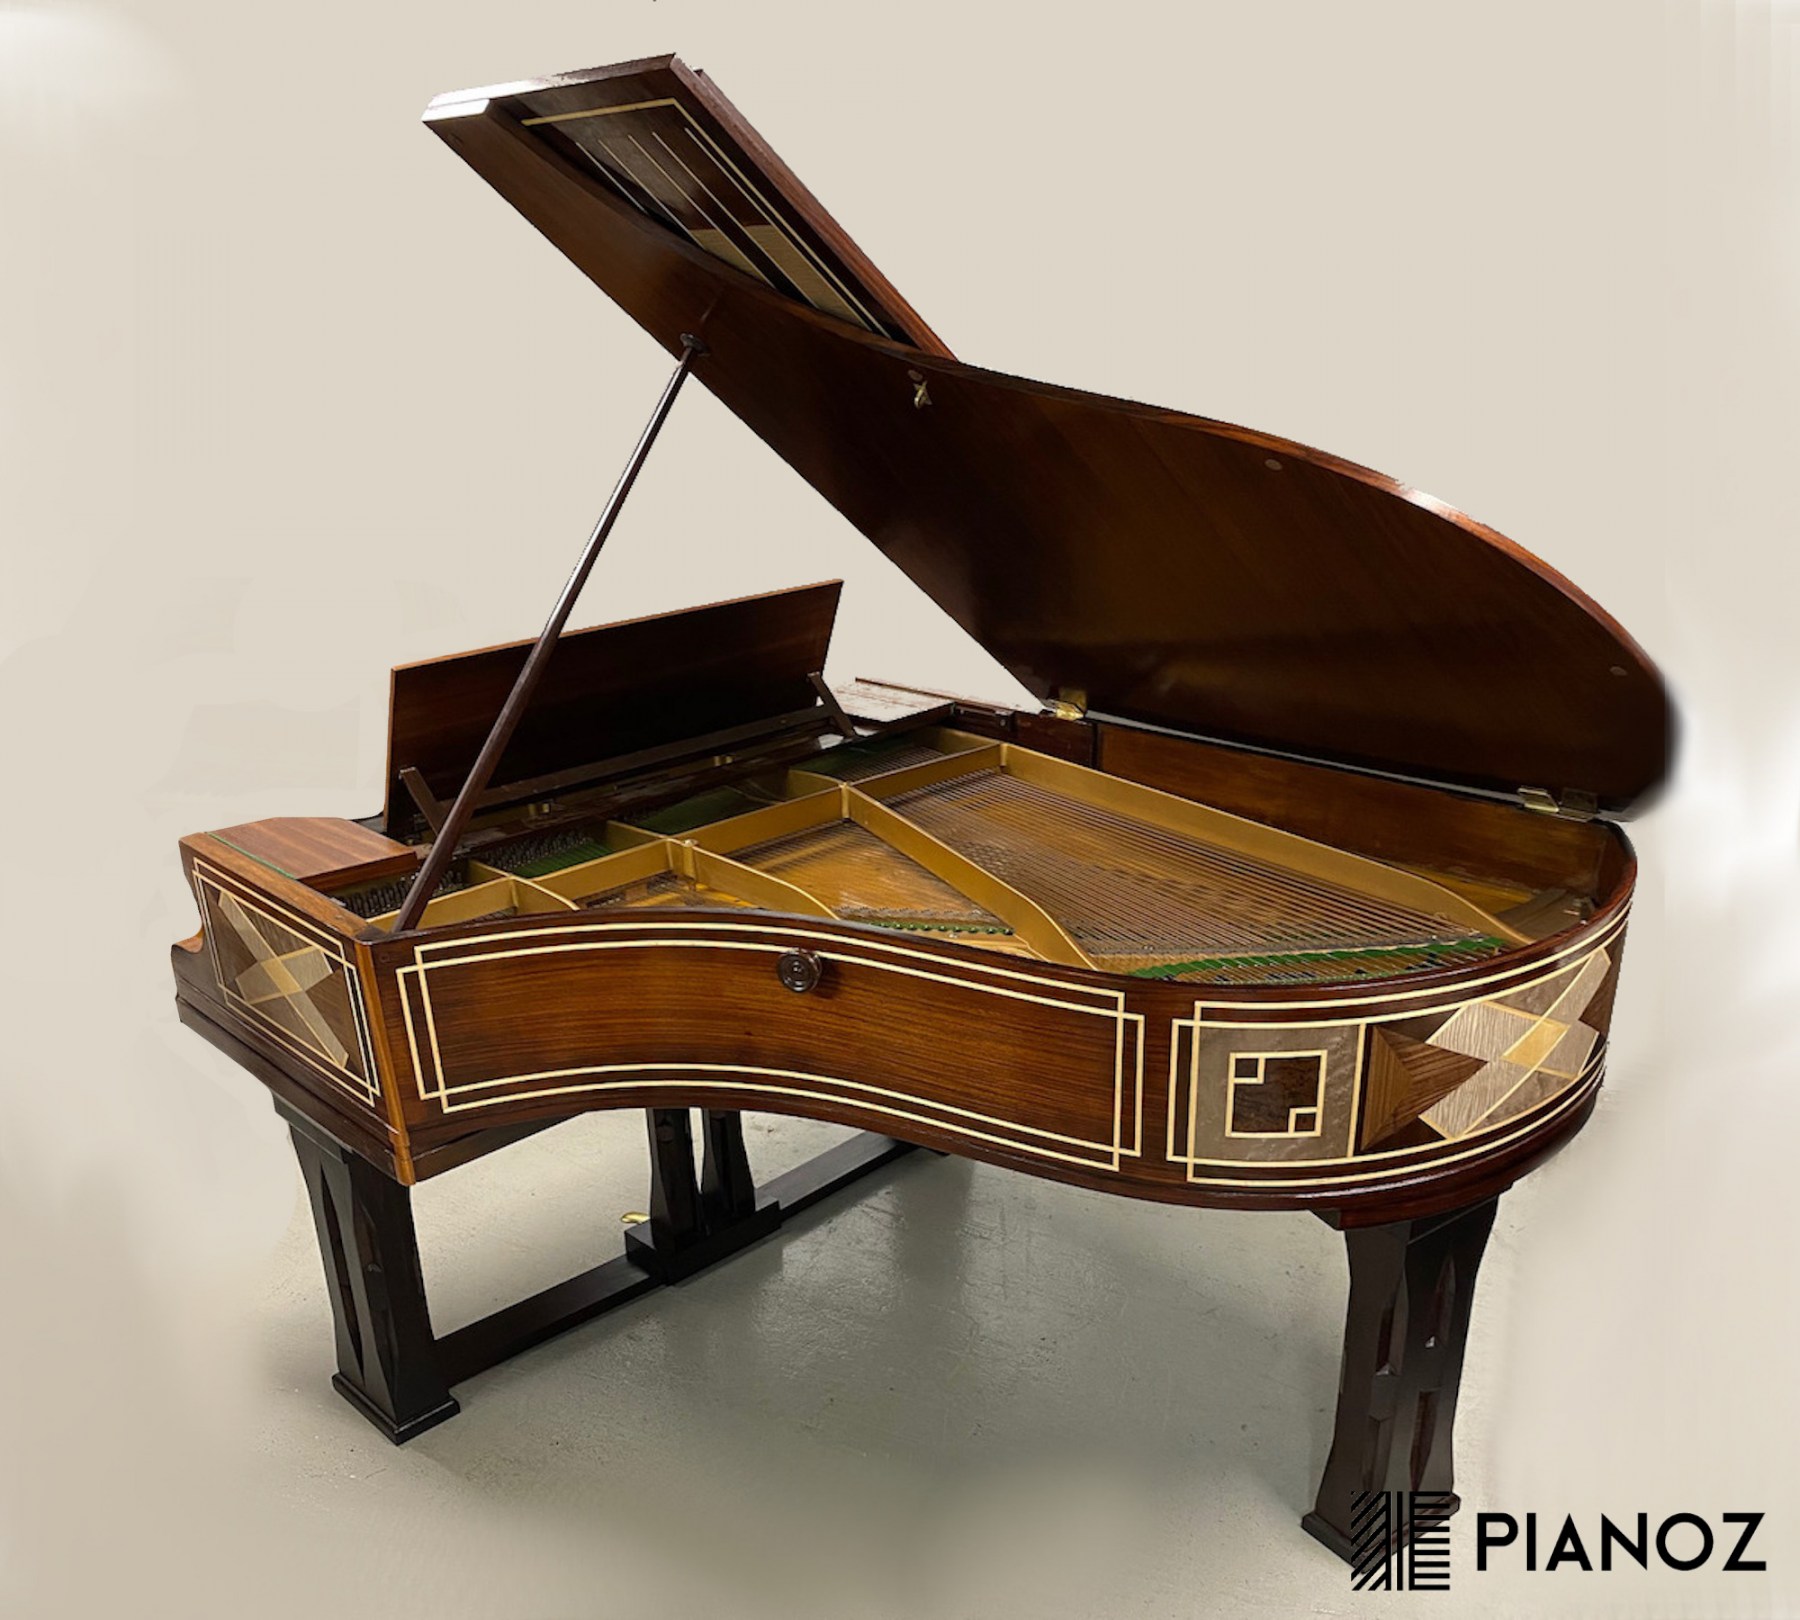 C. Bechstein  Model A Art Case Grand Piano piano for sale in UK